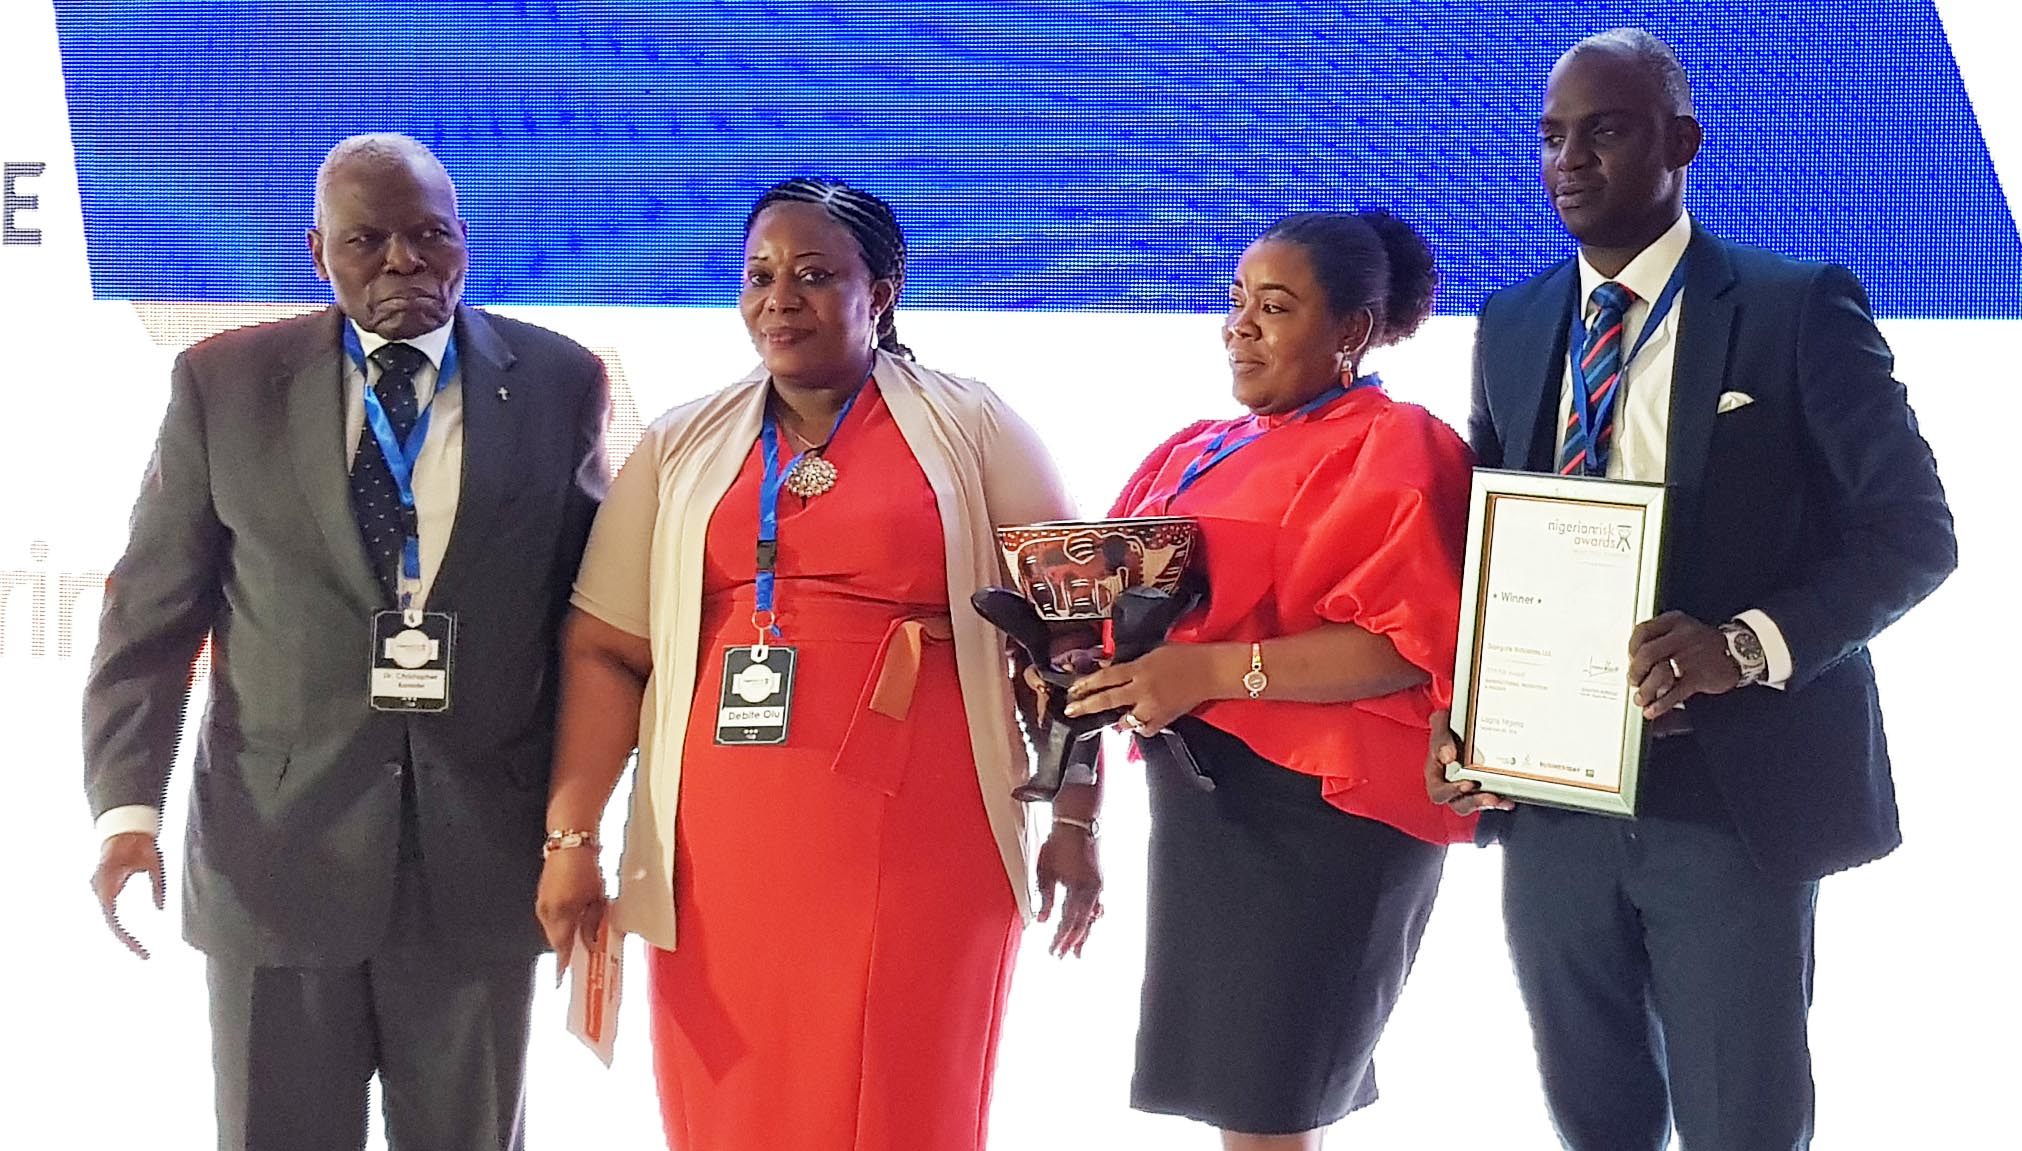 Dangote Group emerges winner at the 2018 Nigerian Risk awards